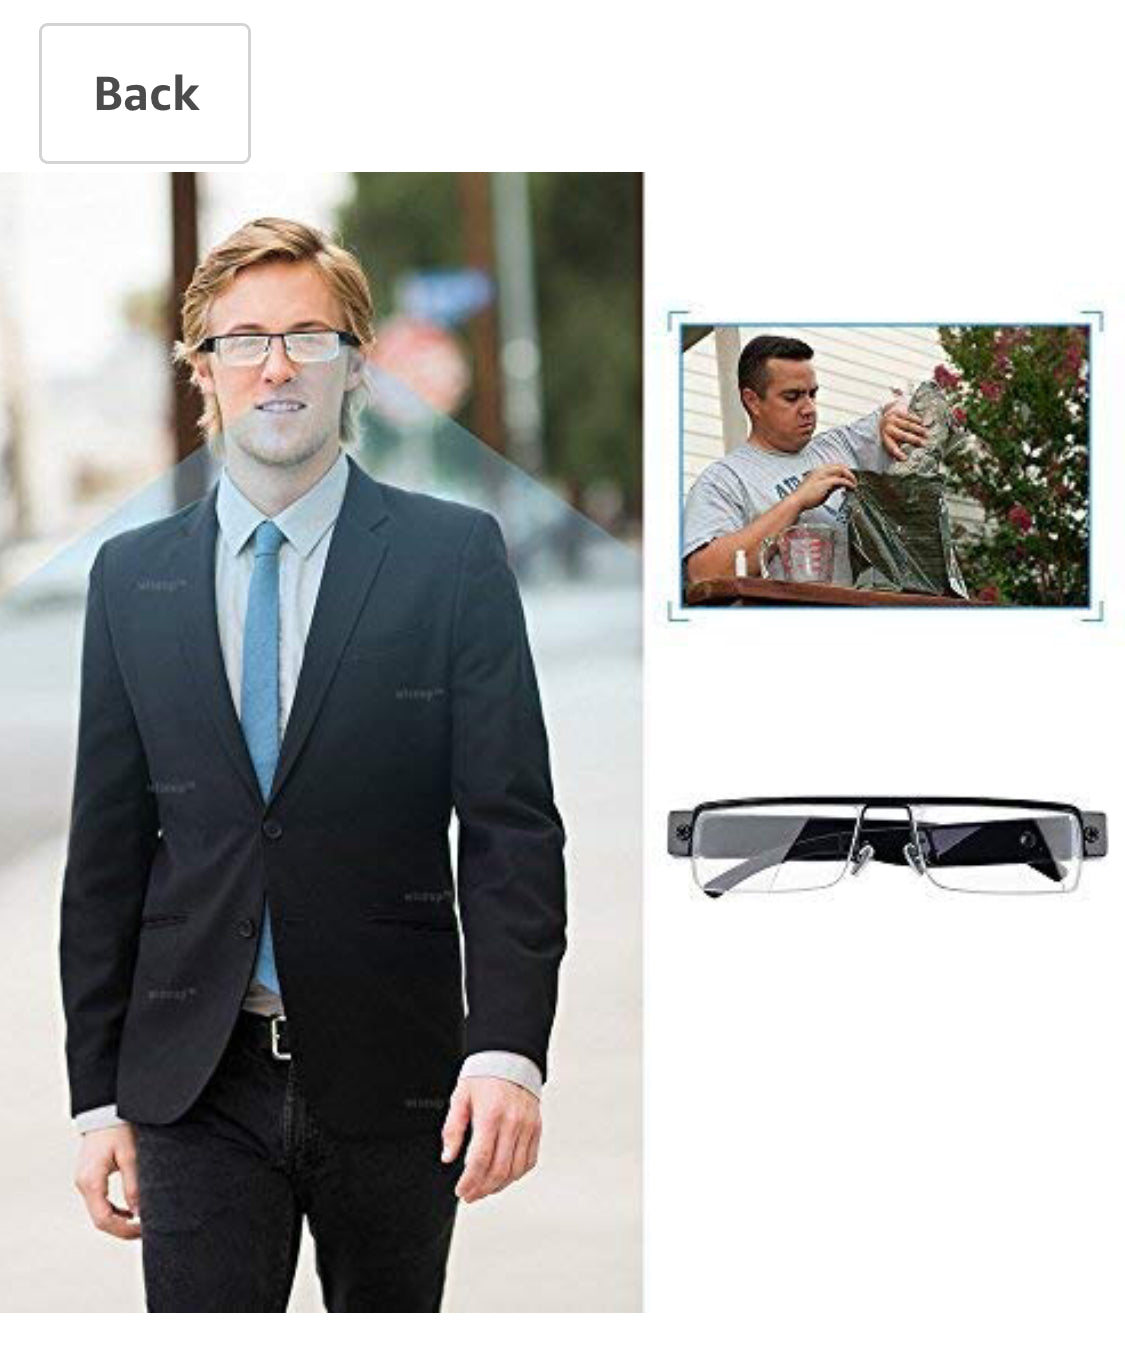 With built-in Full HD spy camera glasses Memory Not included